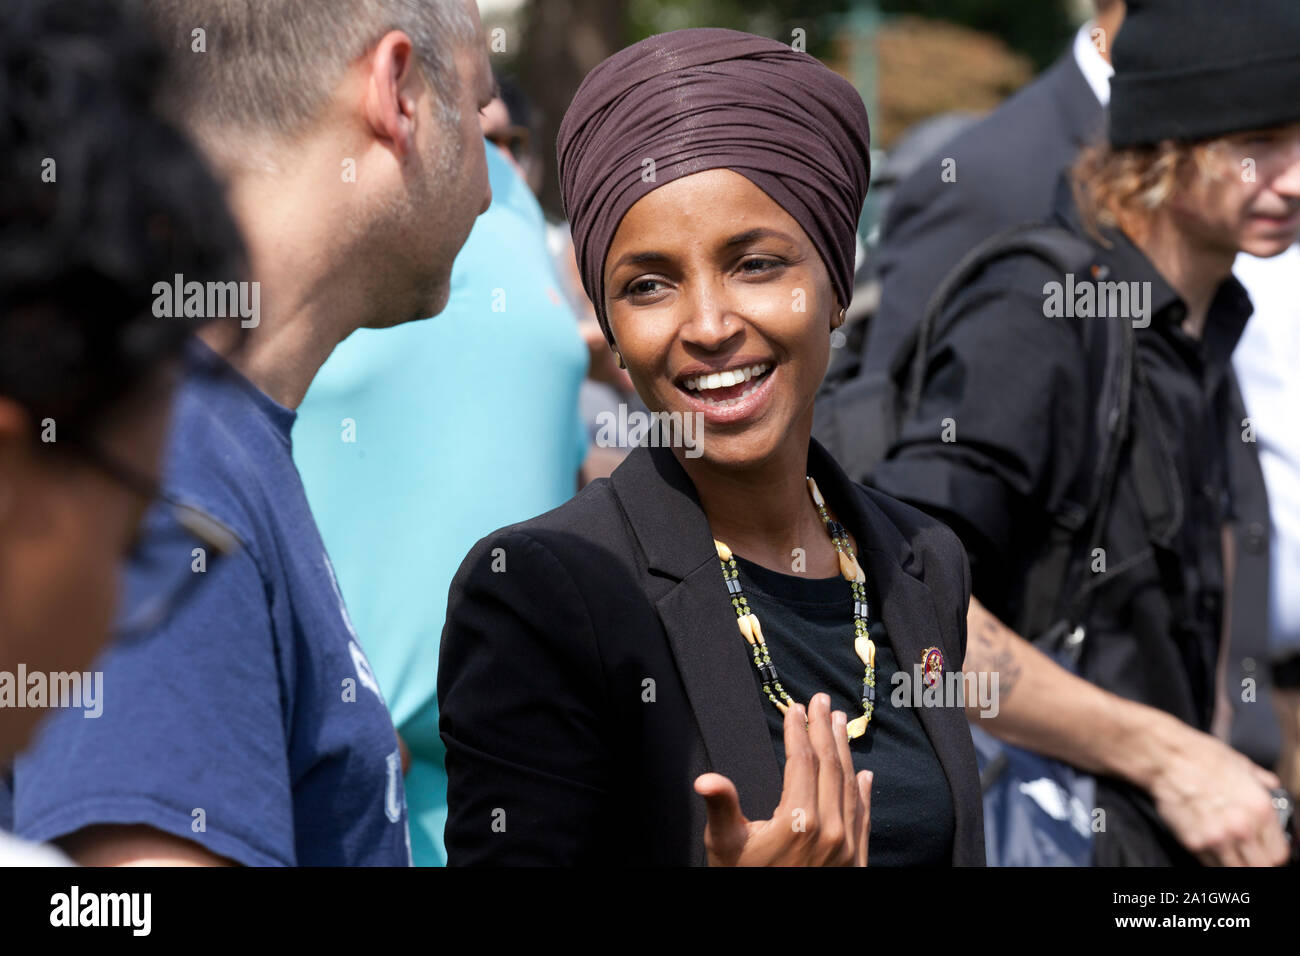 Sept. 26th, 2019, Washington, DC:  US Congresswoman Ilhan Omar (D-MN), Congresswoman Barbara Lee (D-CA), and Congressman Al Green (D-TX), speak at an 'Impeach Trump' rally, hosted by Progressive Democrats of America, in front of the US Capitol.  Pictured: Rep. Ilhan Omar (D-MN) meets with supporters. Stock Photo